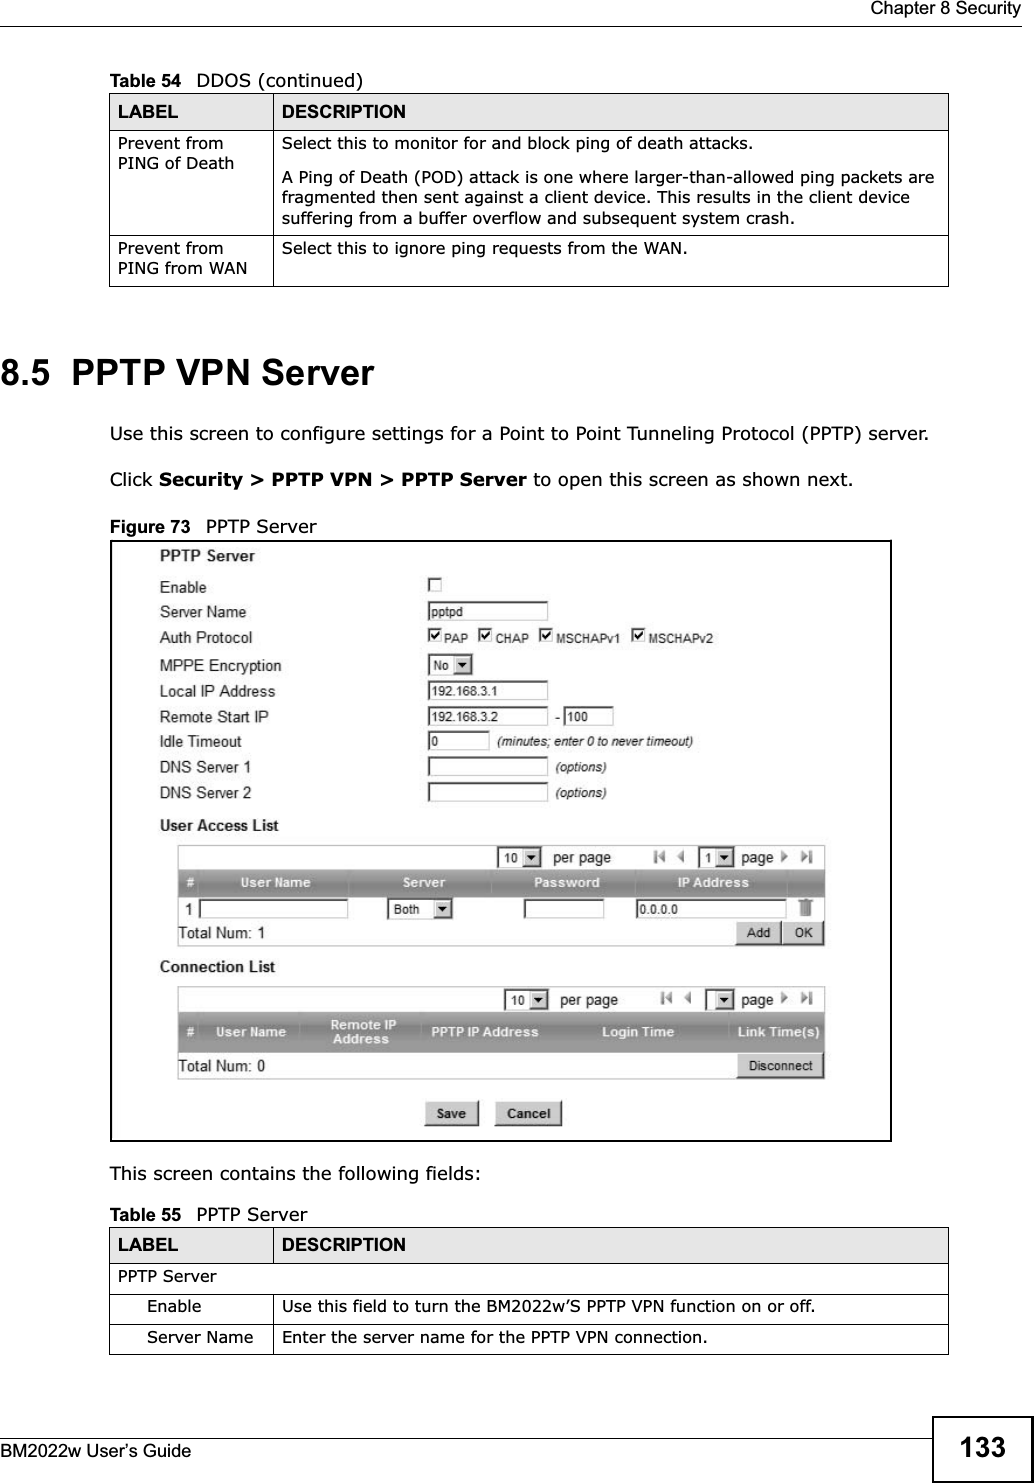  Chapter 8 SecurityBM2022w User’s Guide 1338.5  PPTP VPN ServerUse this screen to configure settings for a Point to Point Tunneling Protocol (PPTP) server.Click Security &gt; PPTP VPN &gt; PPTP Server to open this screen as shown next.Figure 73   PPTP ServerThis screen contains the following fields:Prevent from PING of DeathSelect this to monitor for and block ping of death attacks.A Ping of Death (POD) attack is one where larger-than-allowed ping packets are fragmented then sent against a client device. This results in the client device suffering from a buffer overflow and subsequent system crash.Prevent from PING from WANSelect this to ignore ping requests from the WAN.Table 54   DDOS (continued)LABEL DESCRIPTIONTable 55   PPTP ServerLABEL DESCRIPTIONPPTP ServerEnable Use this field to turn the BM2022w’S PPTP VPN function on or off.Server Name Enter the server name for the PPTP VPN connection.